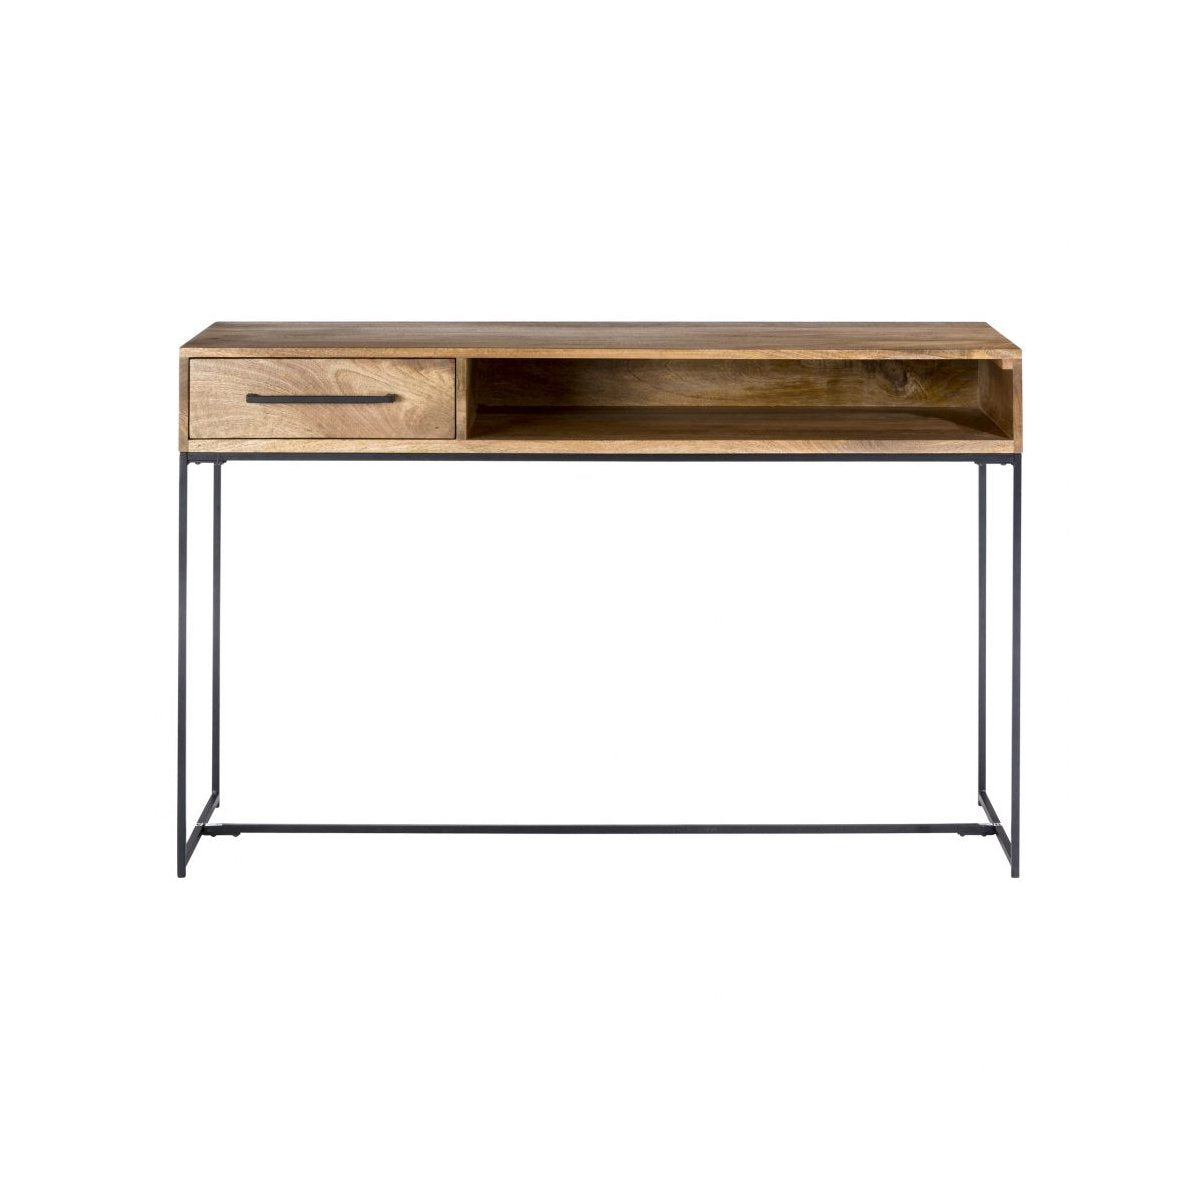 Load image into Gallery viewer, Colvin Console Table Console Tables Moe&amp;#39;s     Four Hands, Burke Decor, Mid Century Modern Furniture, Old Bones Furniture Company, Old Bones Co, Modern Mid Century, Designer Furniture, https://www.oldbonesco.com/
